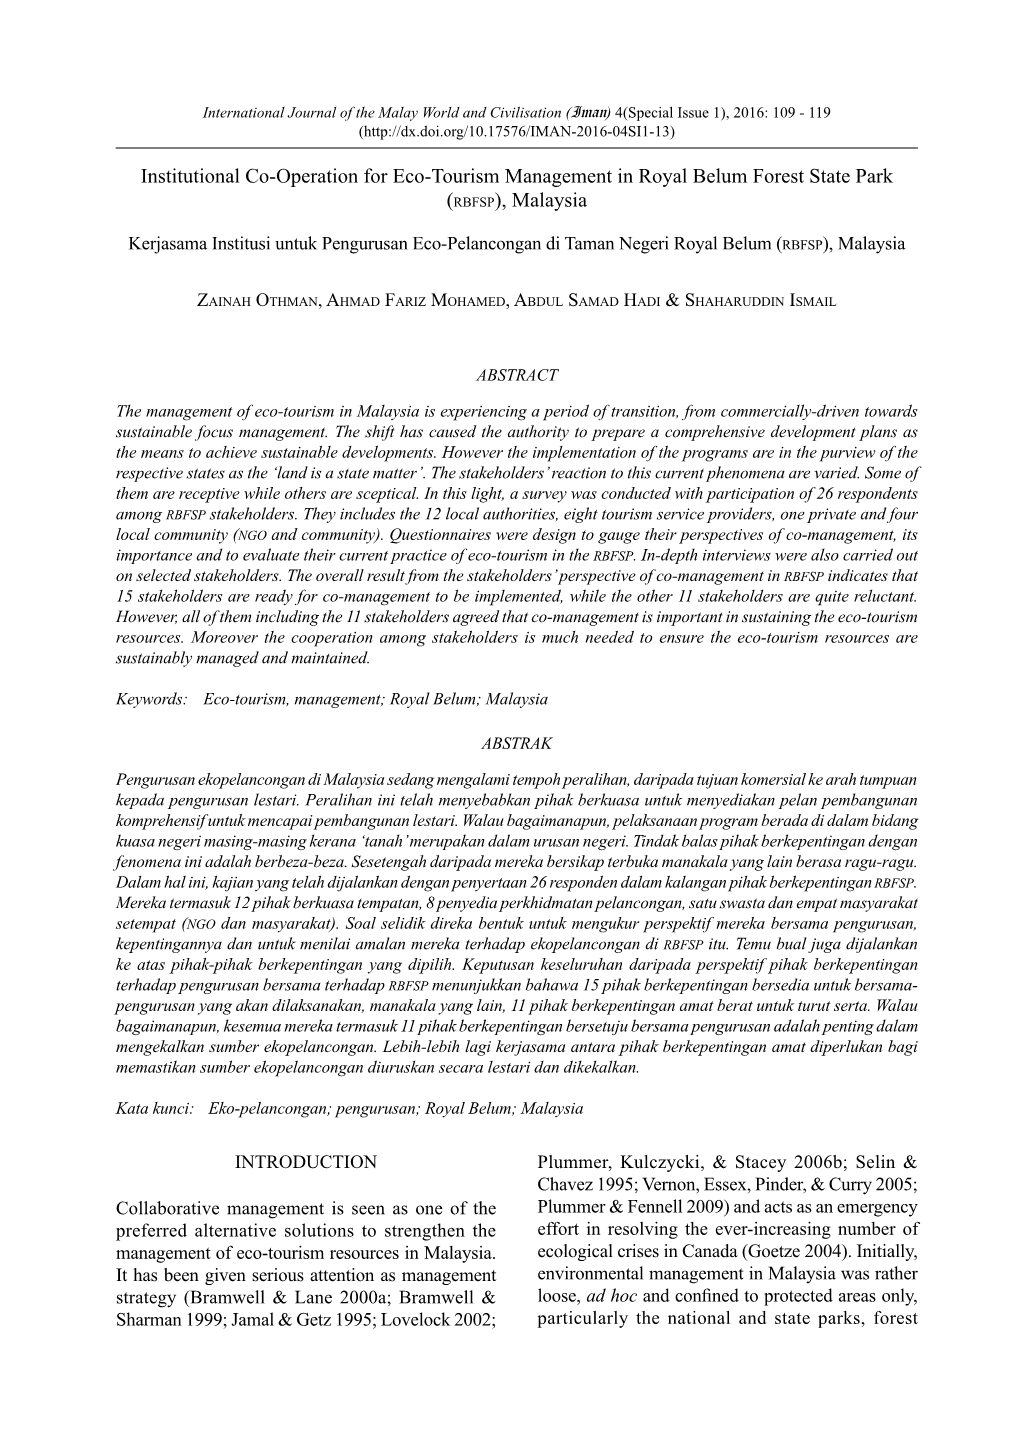 Institutional Co-Operation for Eco-Tourism Management in Royal Belum Forest State Park (RBFSP), Malaysia